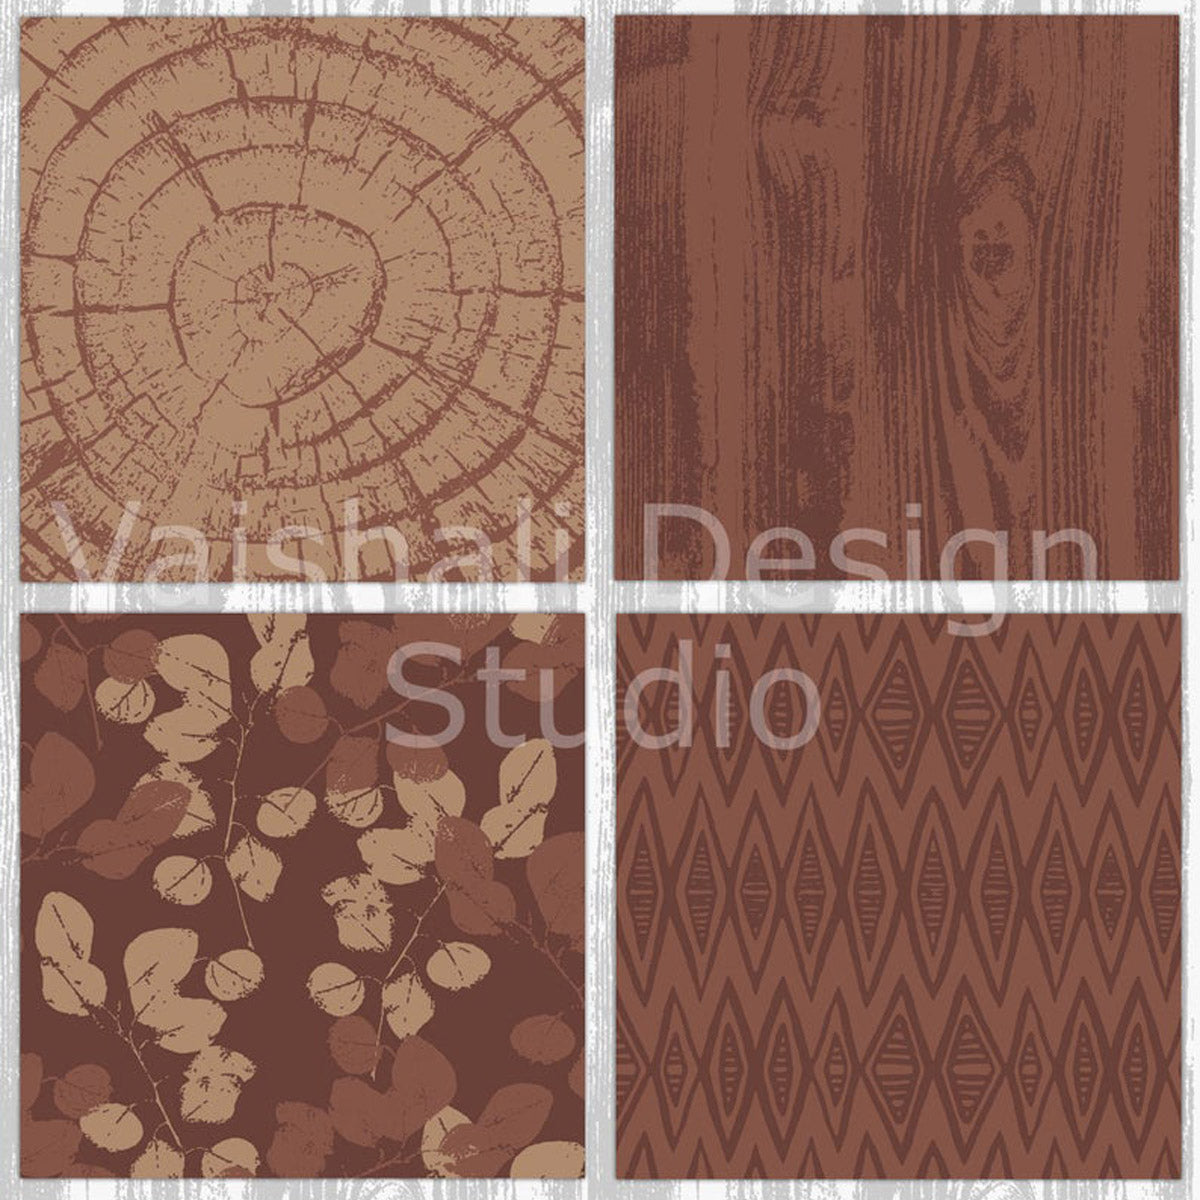 Wooden texture, printable coasters, set of 4 designs, 3.8"X3.8"